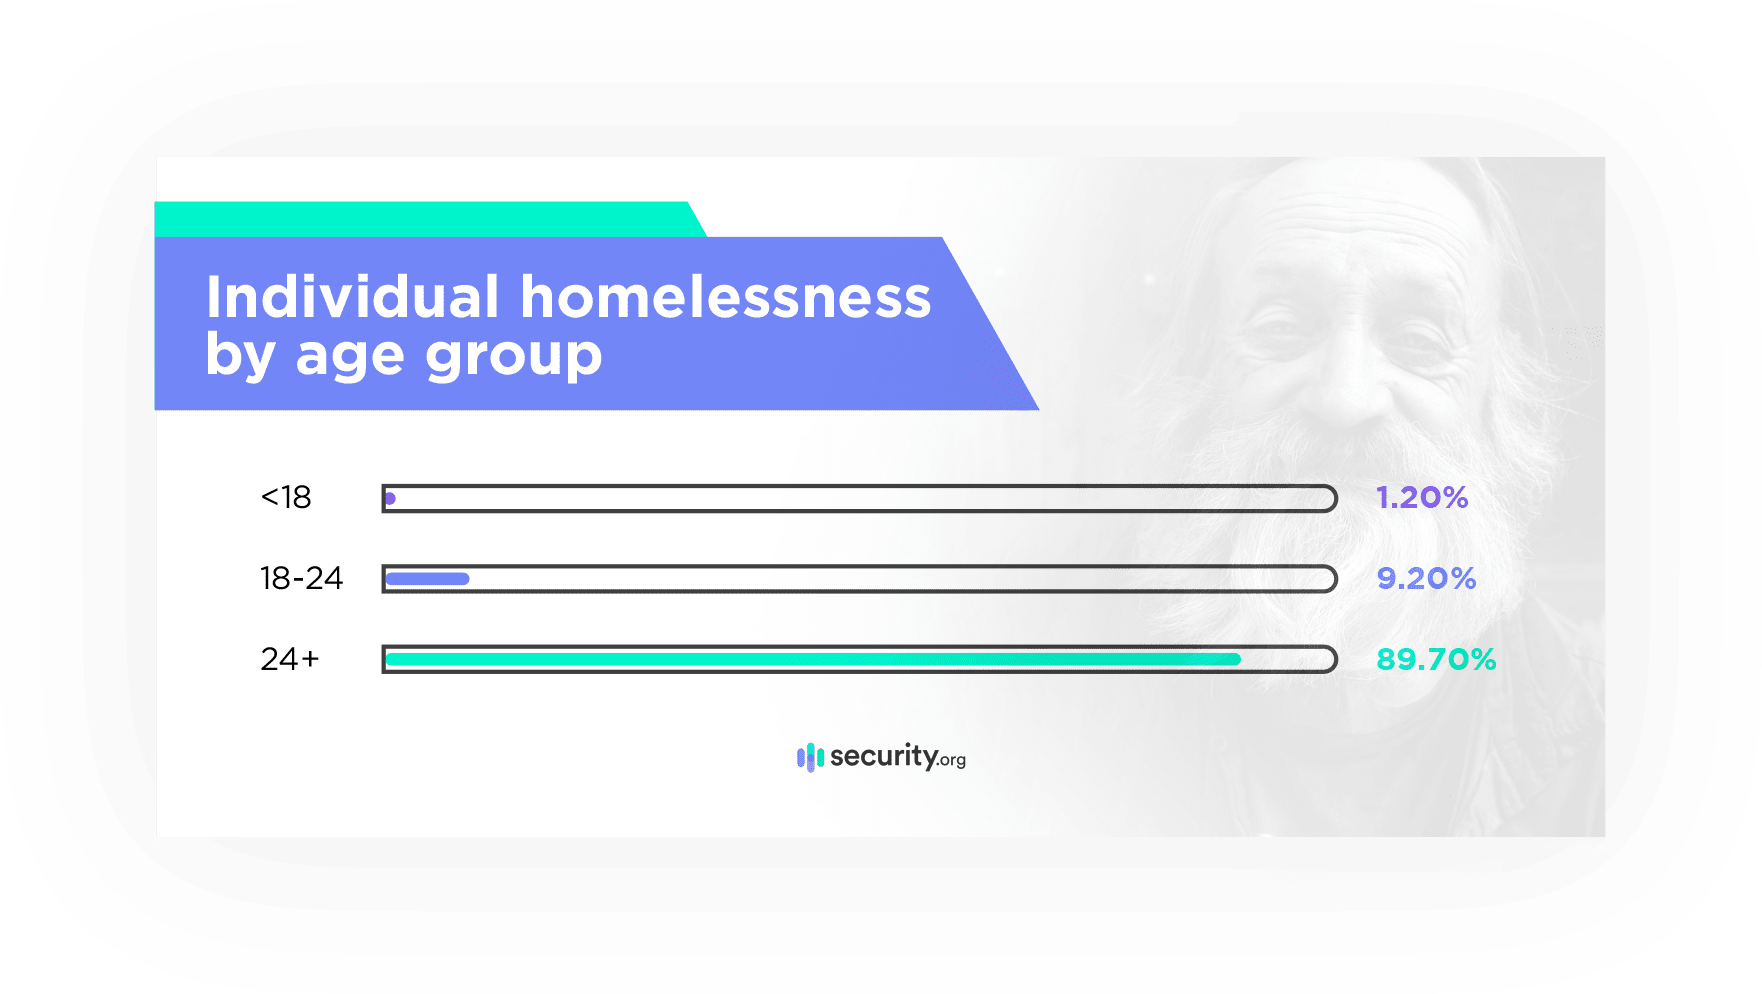 Individual homelessness by age group